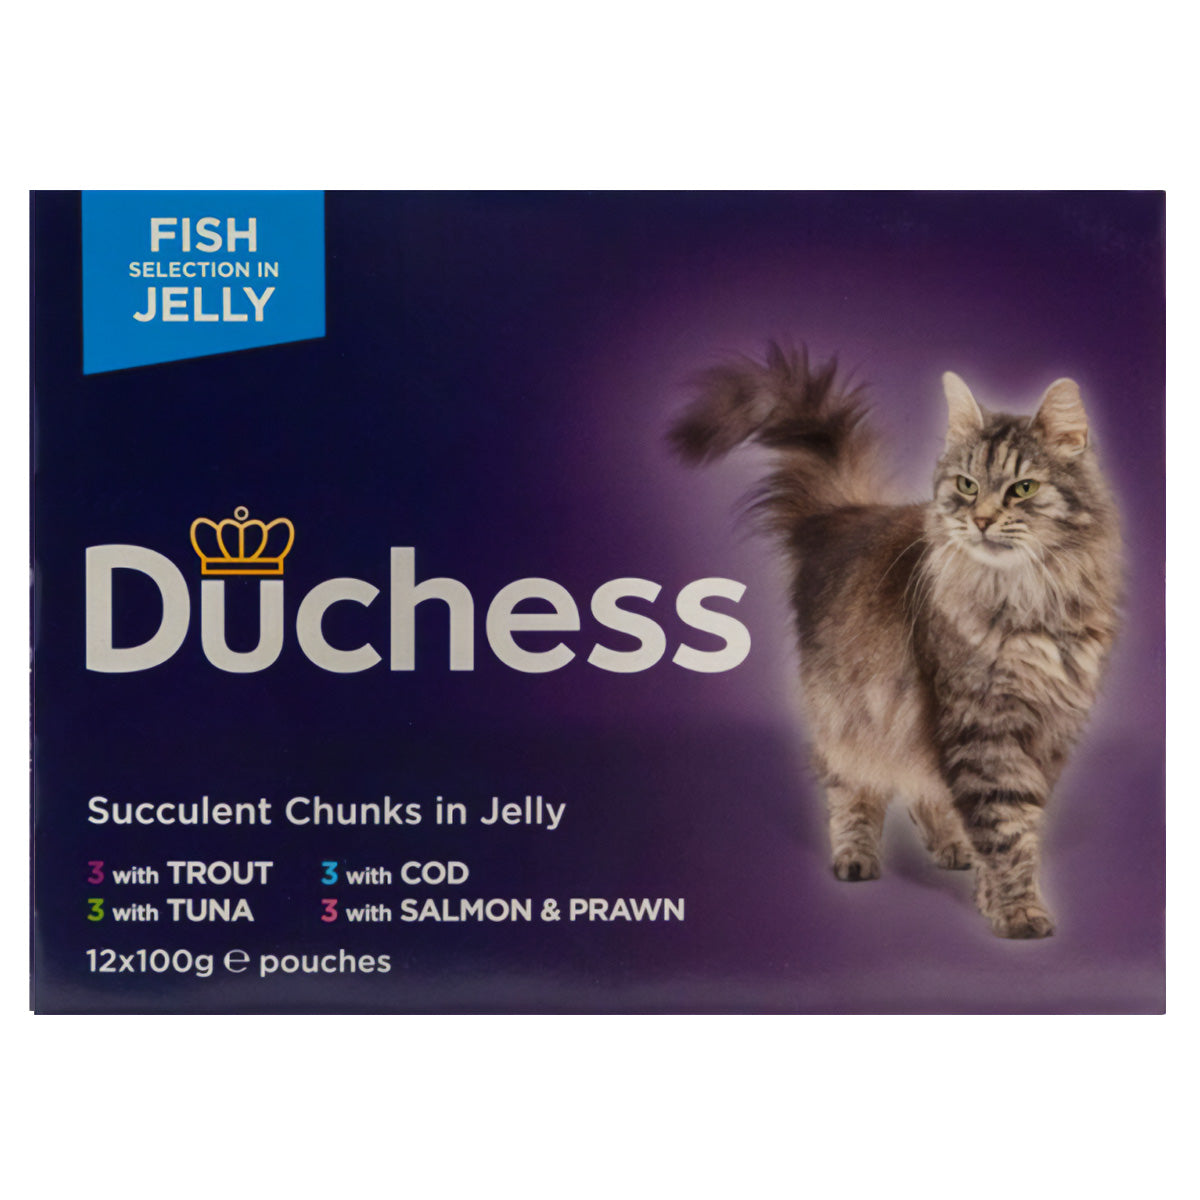 Duchess - Fish Selection in Jelly (Premium Quality) - 12x100g - Continental Food Store